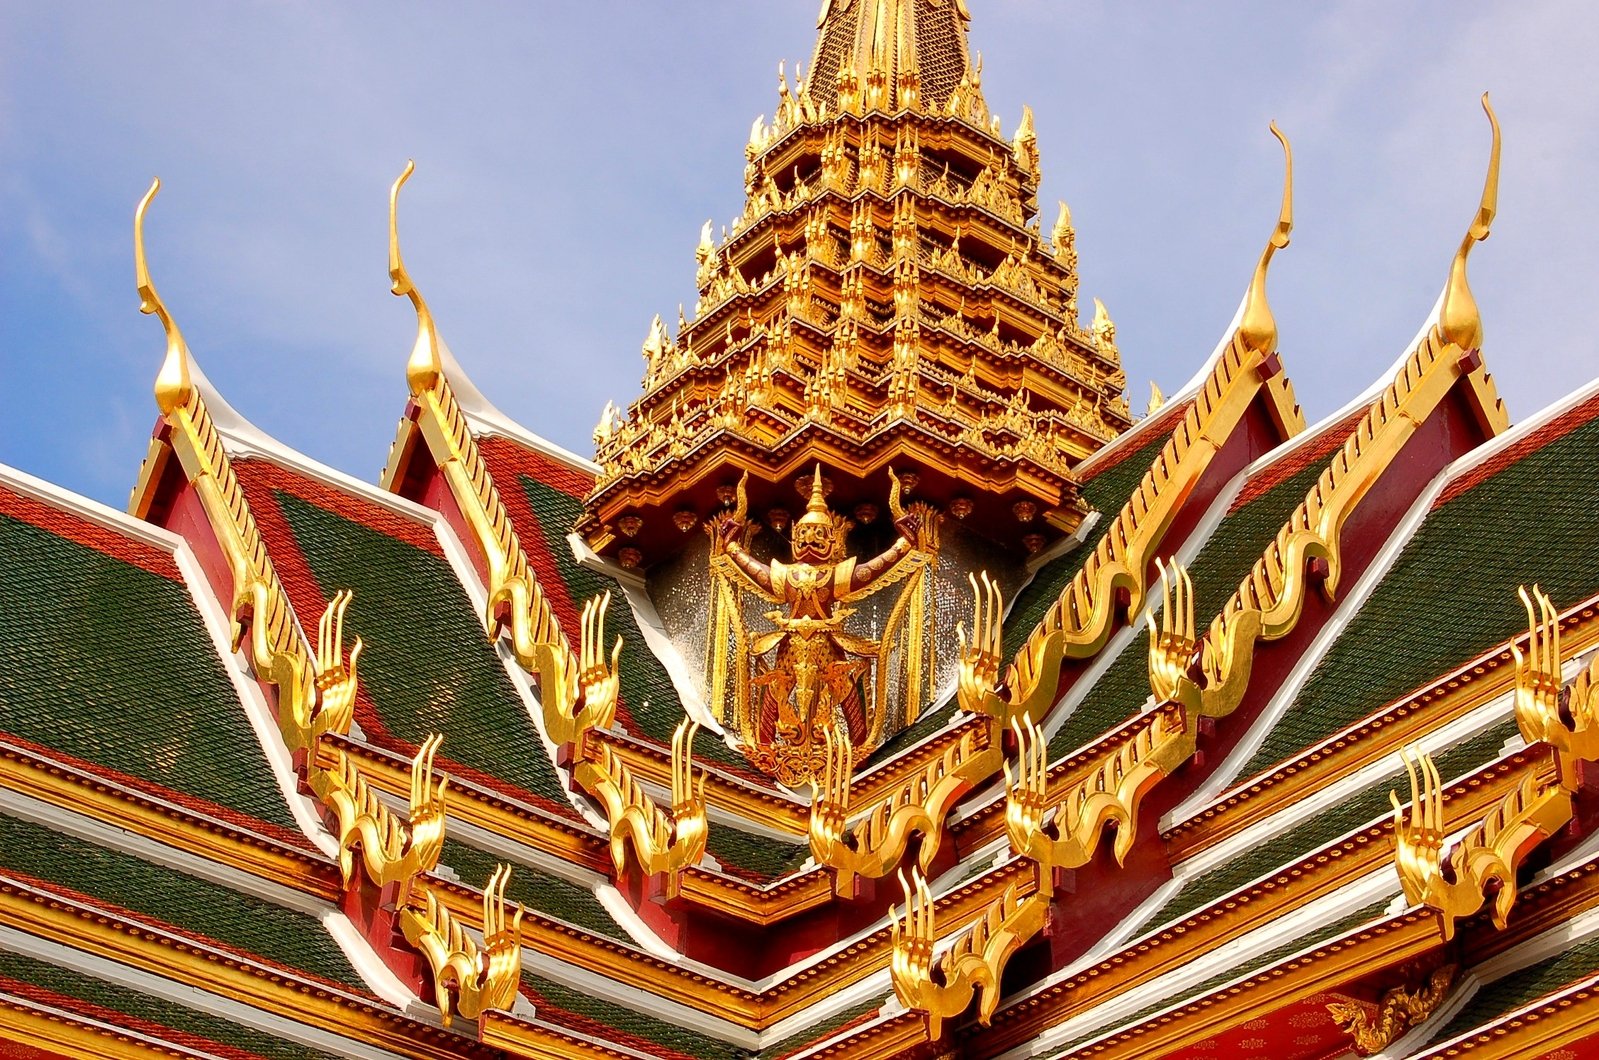 golden decorations on the roof of an ornate building